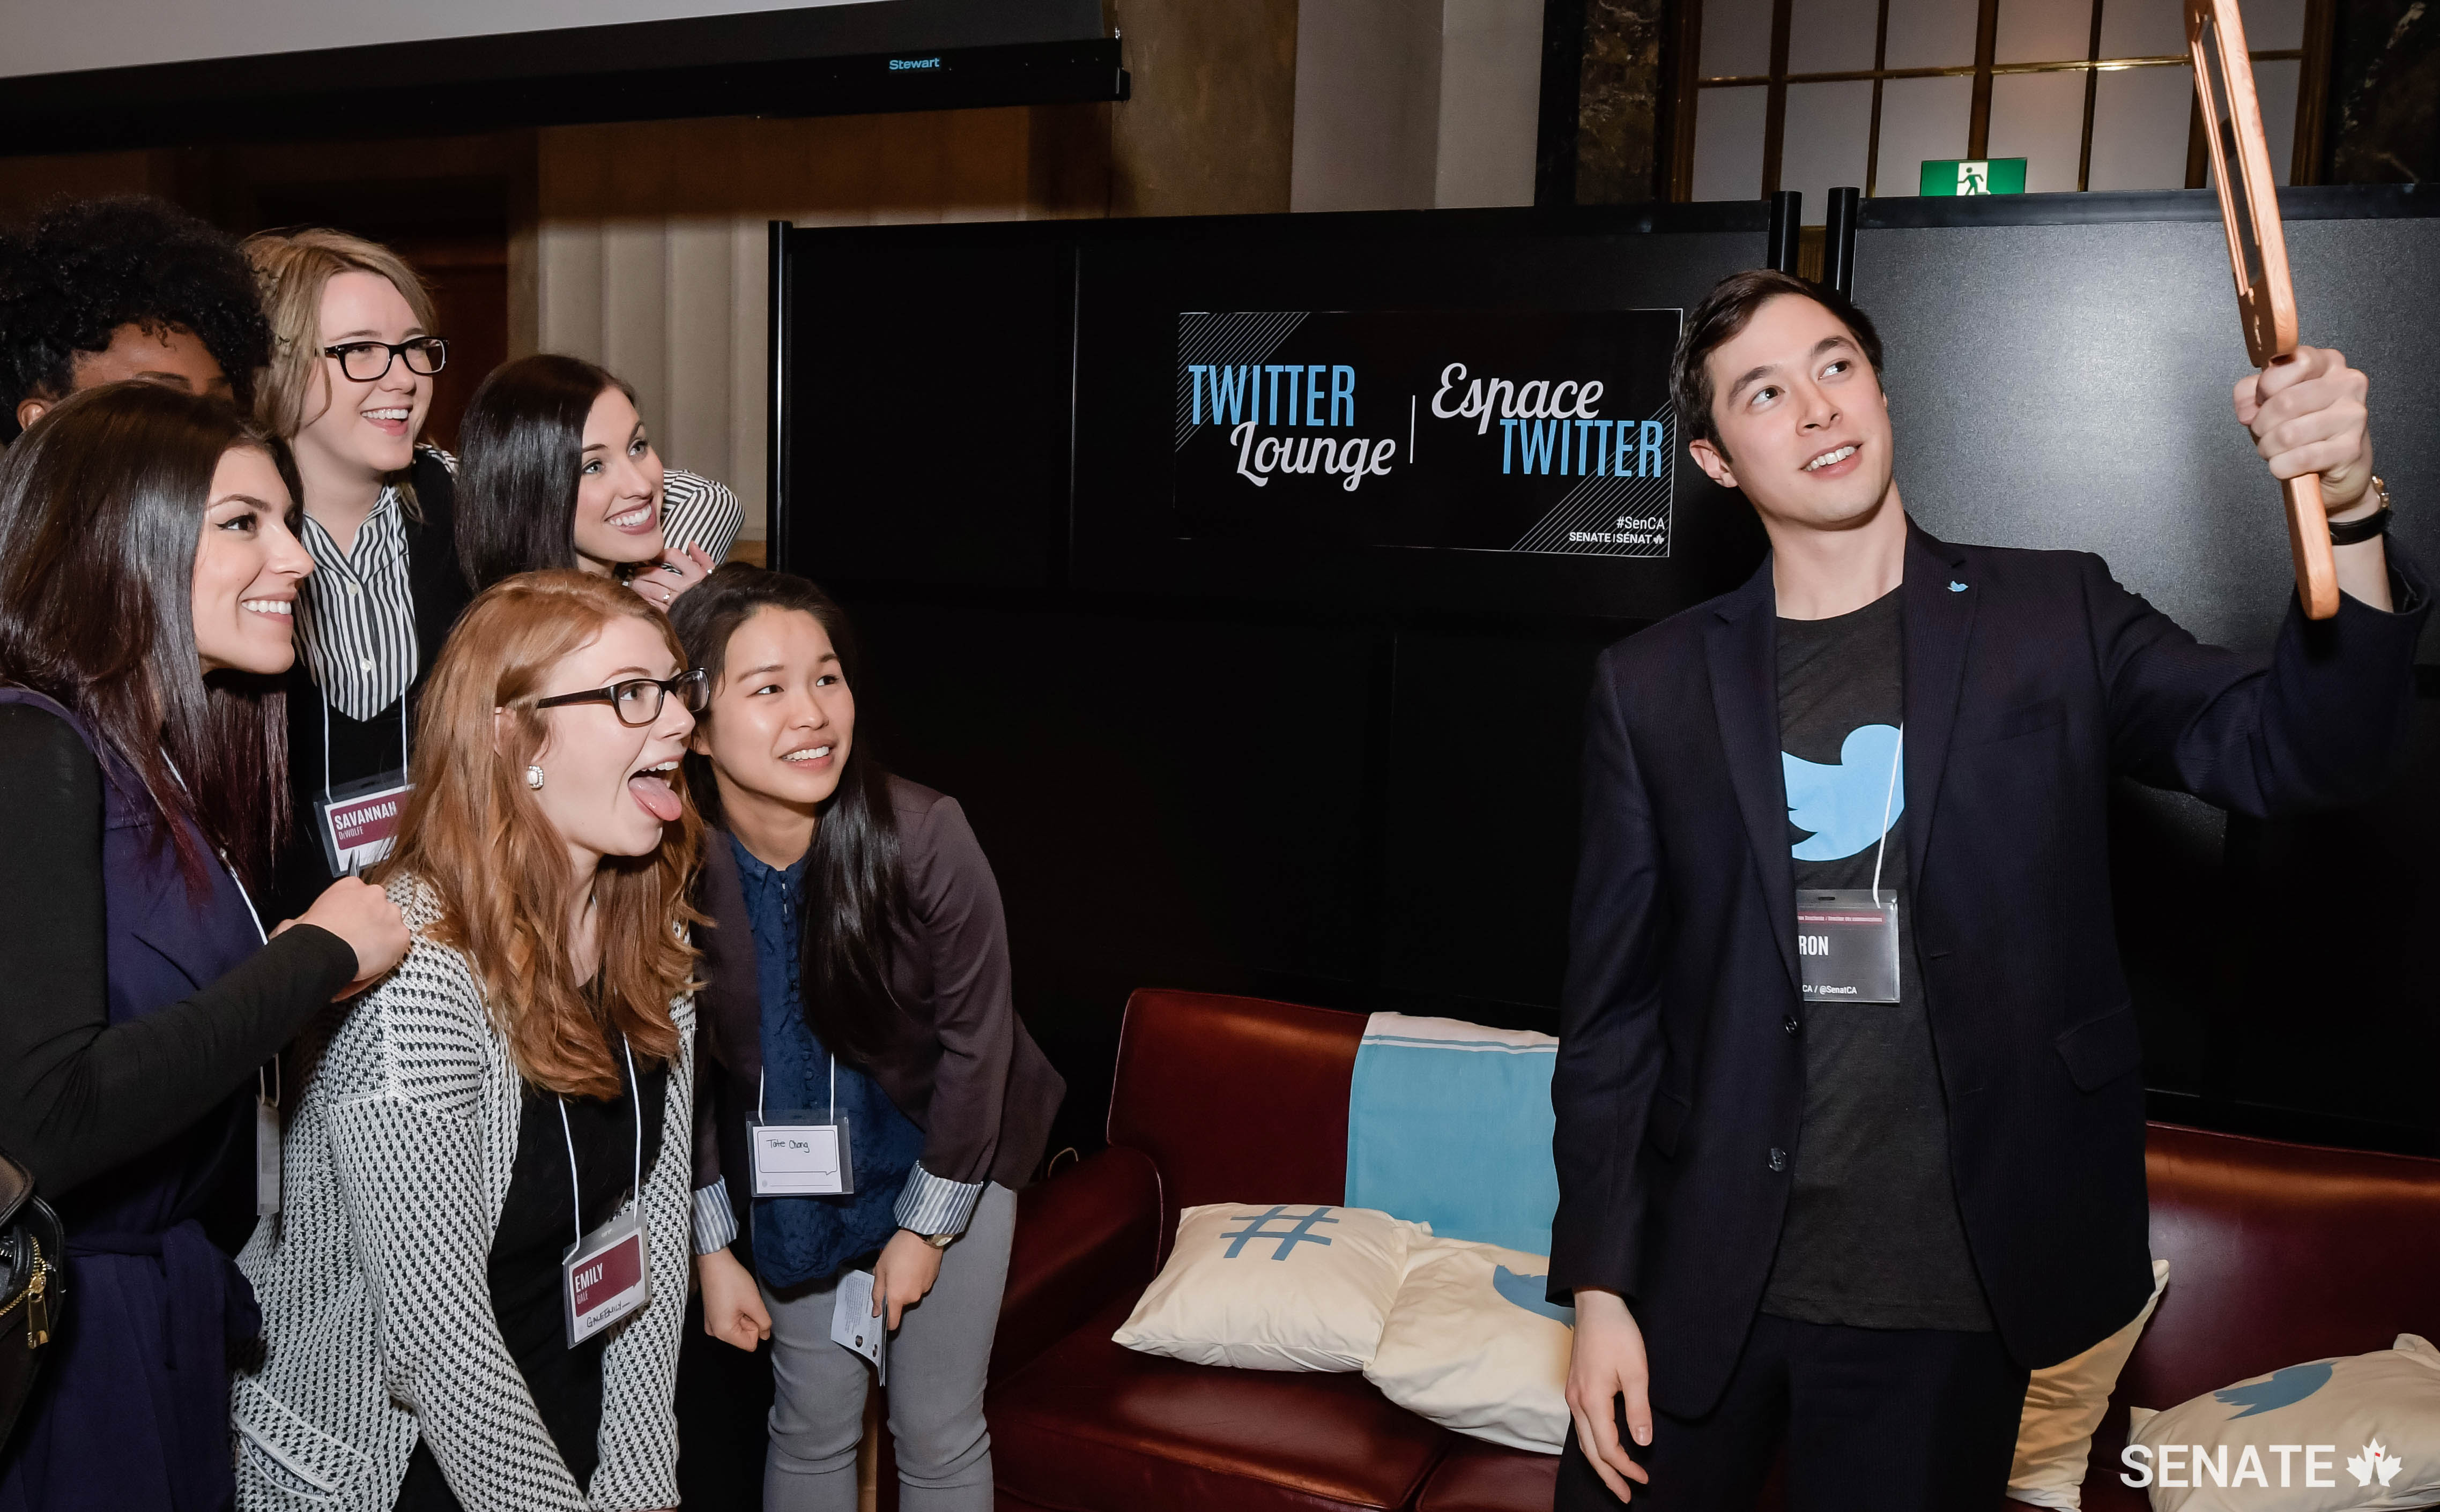 Aaron Bell of Senate Communications helps Tweet out a group photo. With him are (from left) National Public Relations’ Tammy Alamrieh, House of Commons staffer Savannah DeWolfe, Kristin Wilton, Emily Gale and Tate Chong.